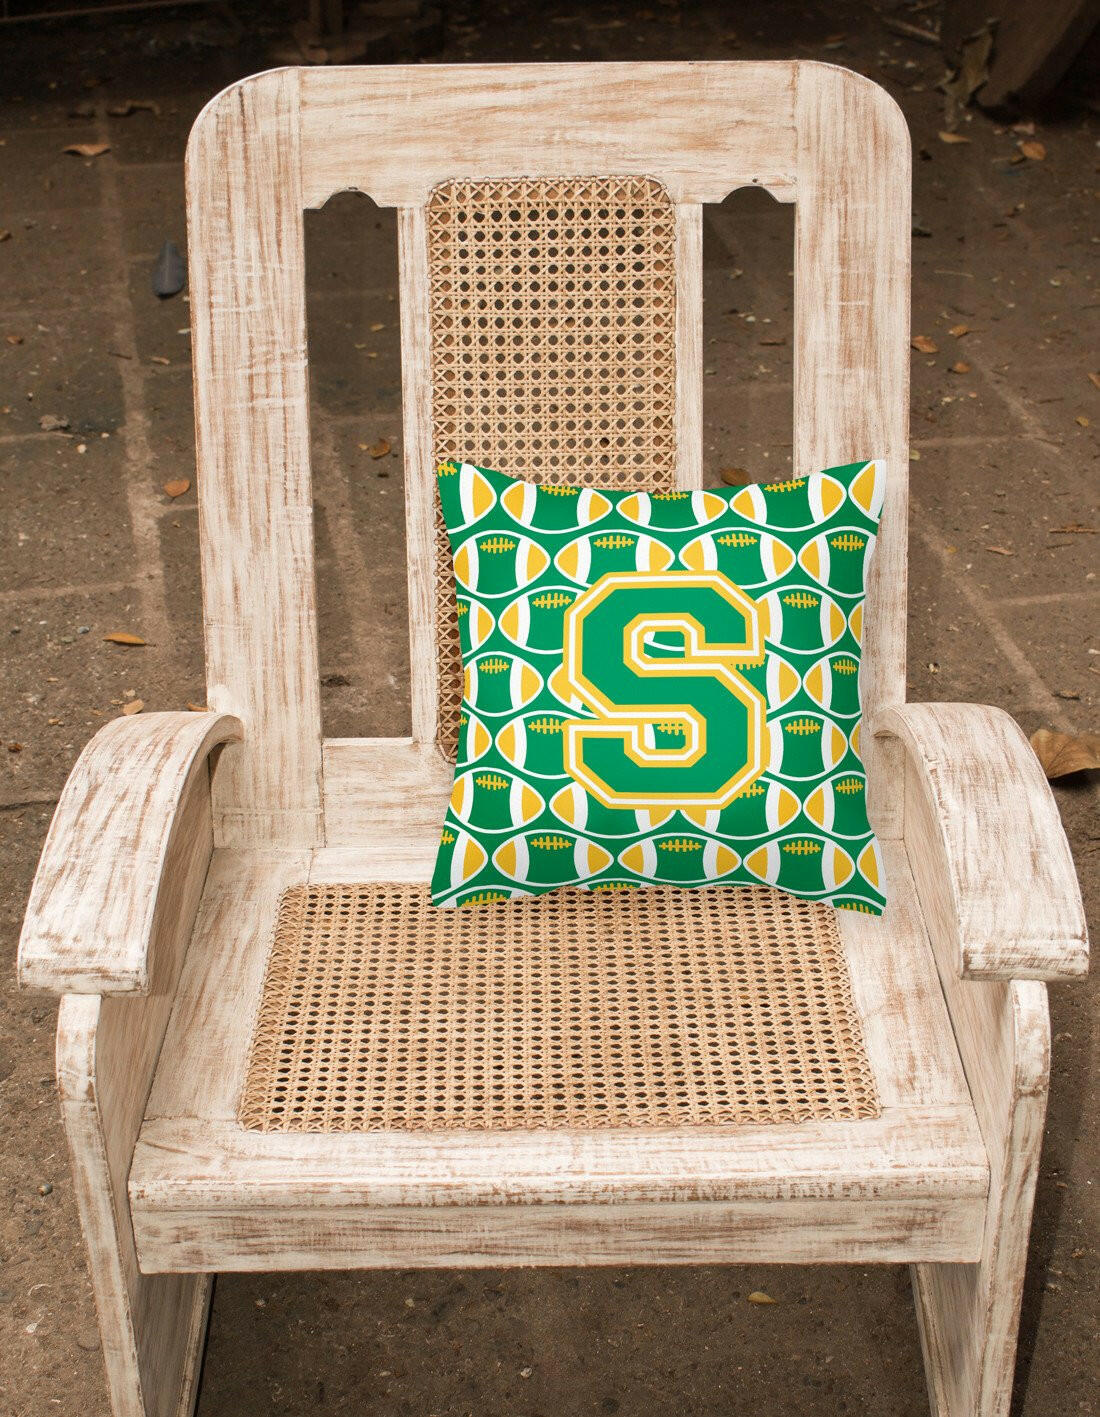 Letter S Football Green and Gold Fabric Decorative Pillow CJ1069-SPW1414 by Caroline's Treasures